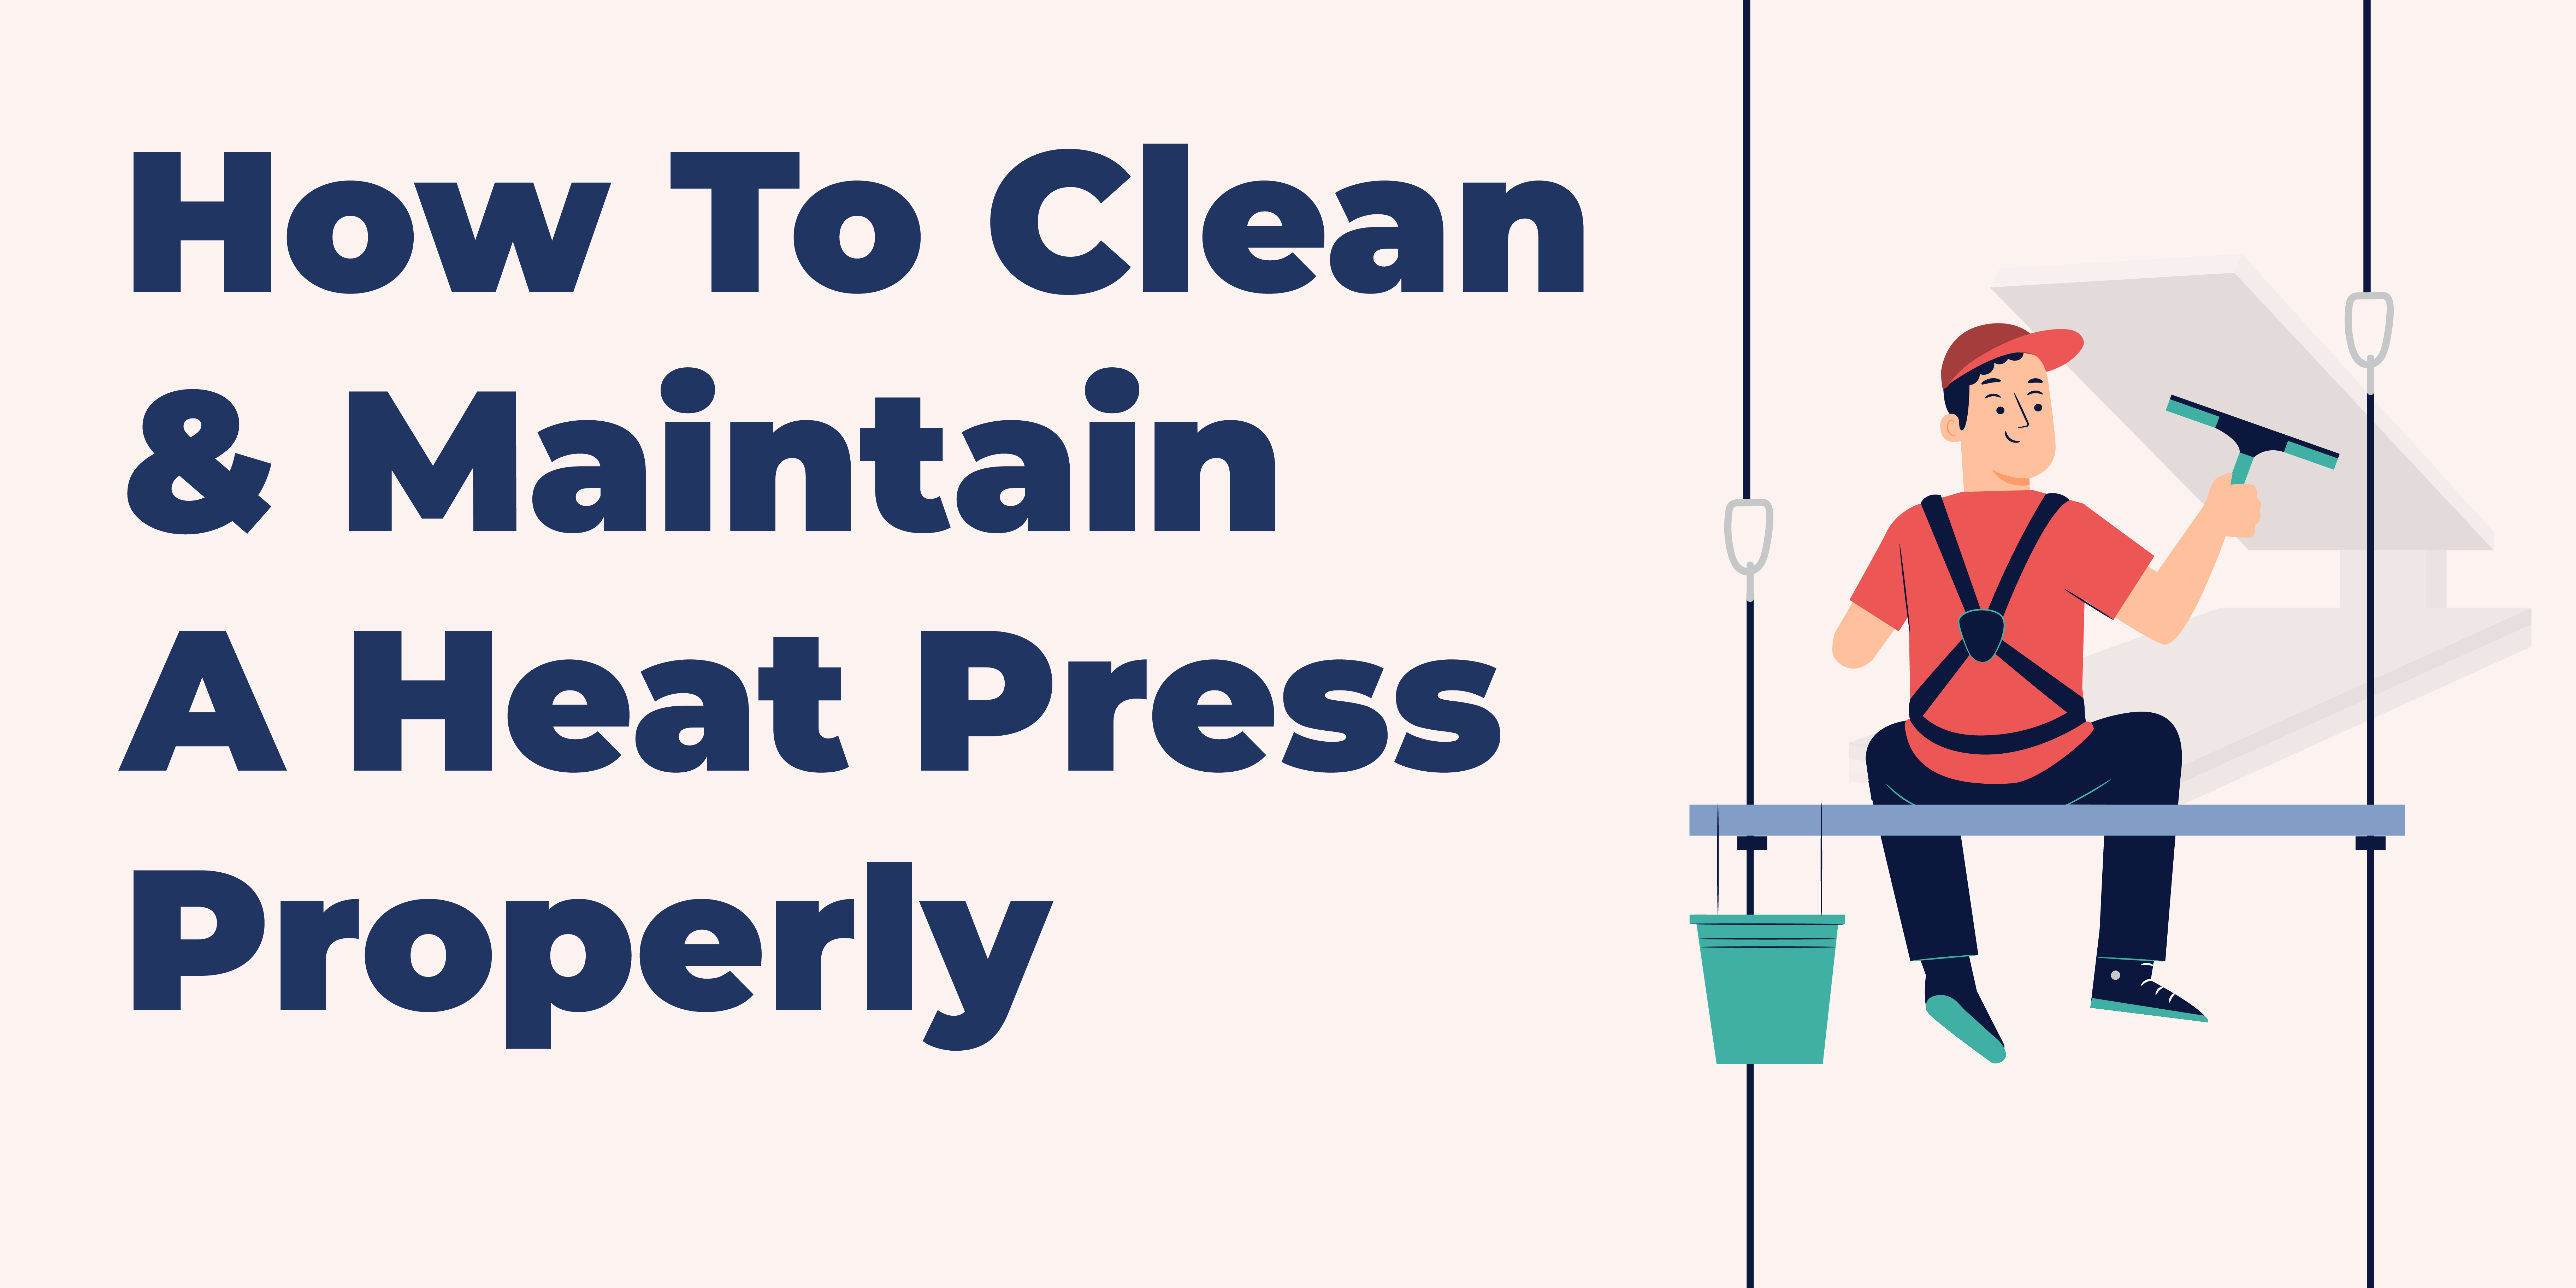 How to Clean & Maintain A Heat Press Properly